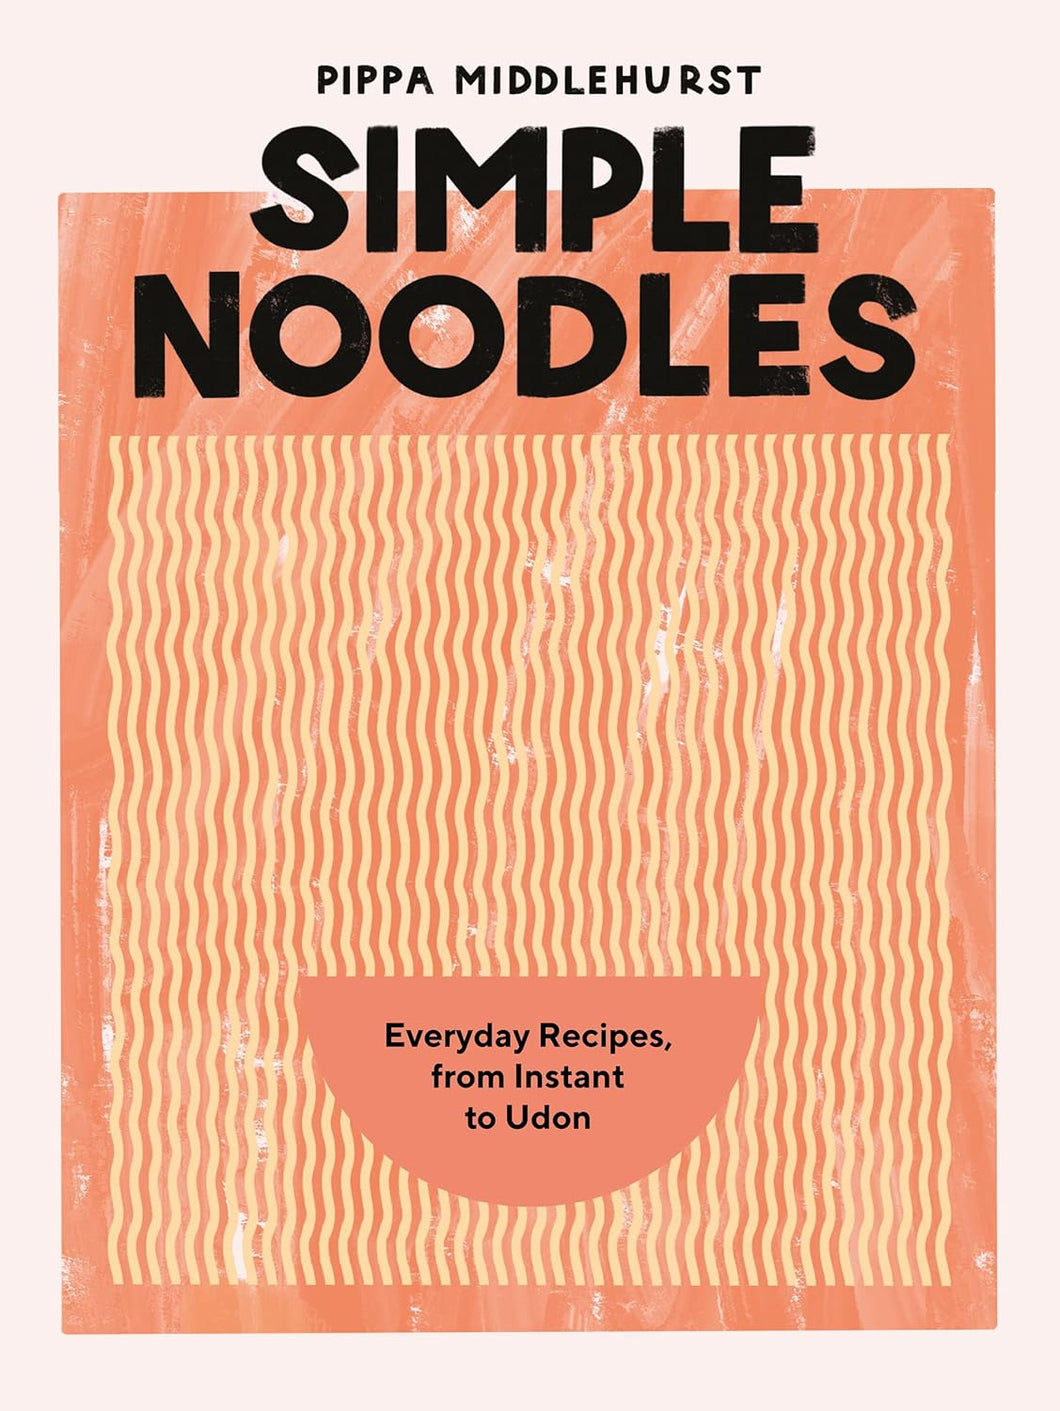 Simple Noodles: Everyday Recipes, from Instant to Udon by Pippa Middlehurst